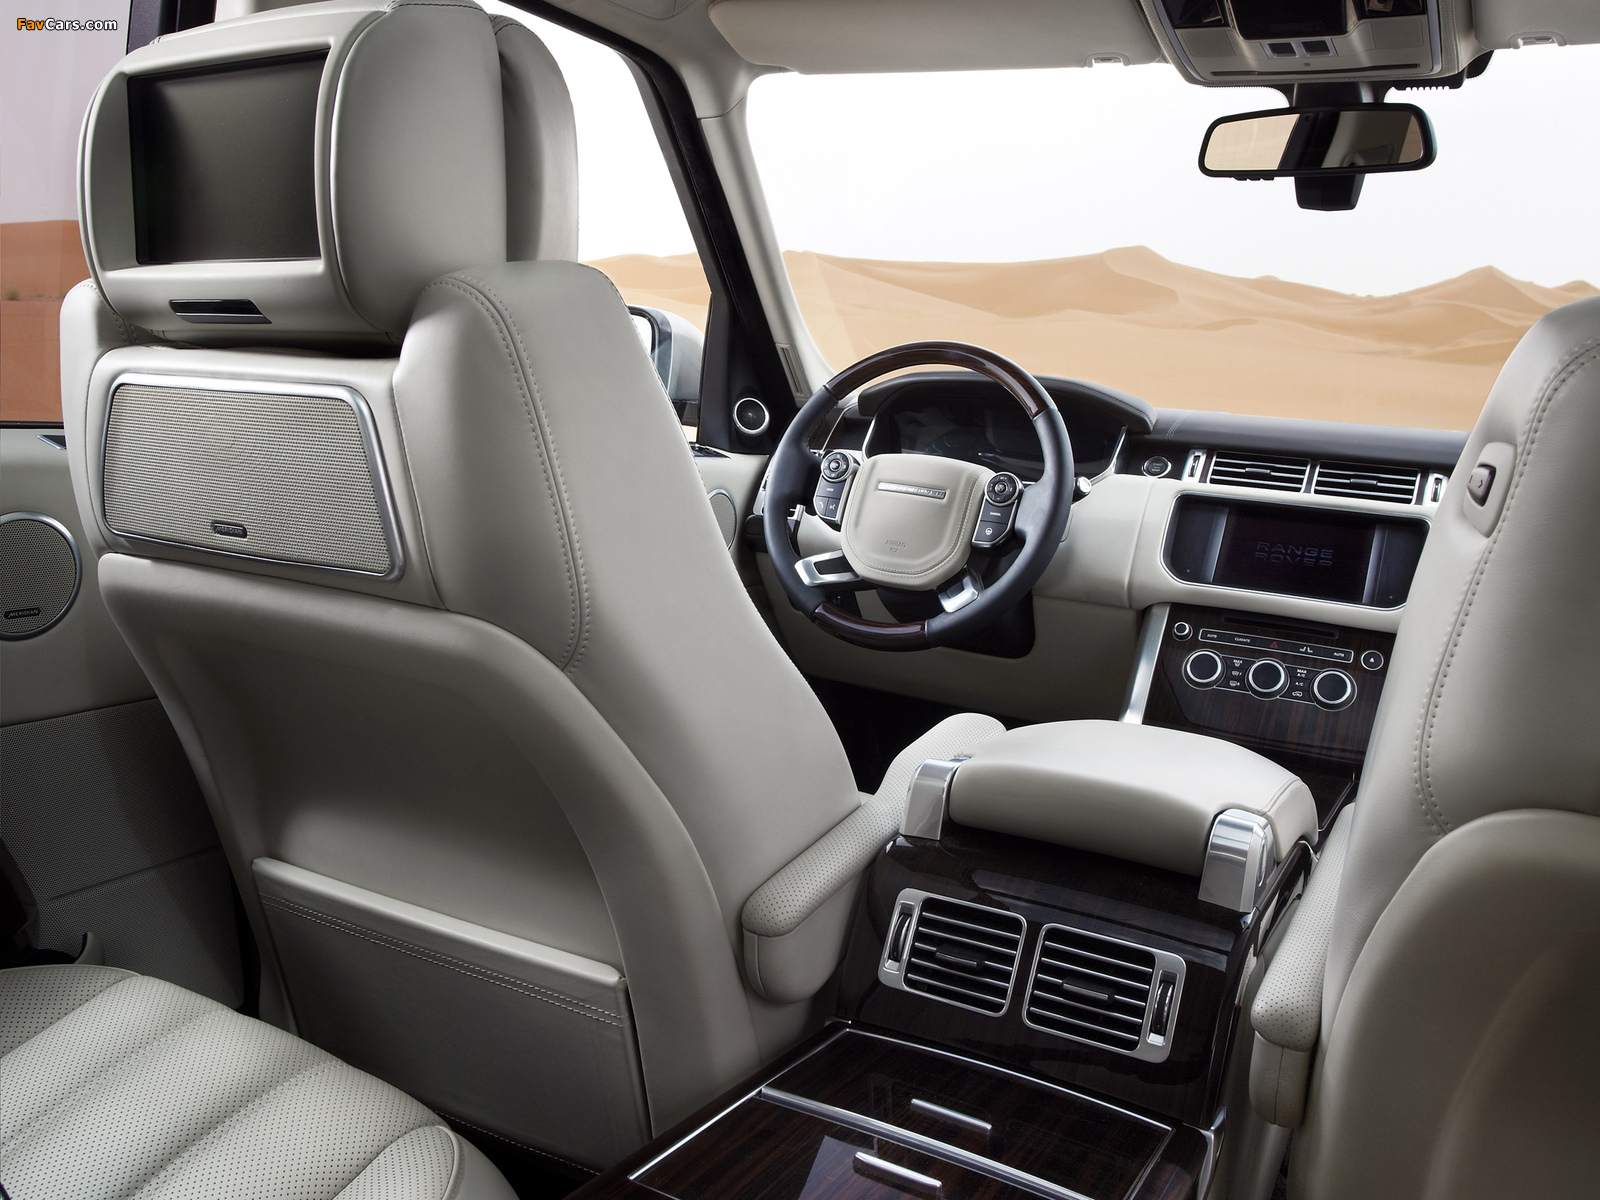 Range Rover Autobiography V8 (L405) 2012 wallpapers (1600 x 1200)